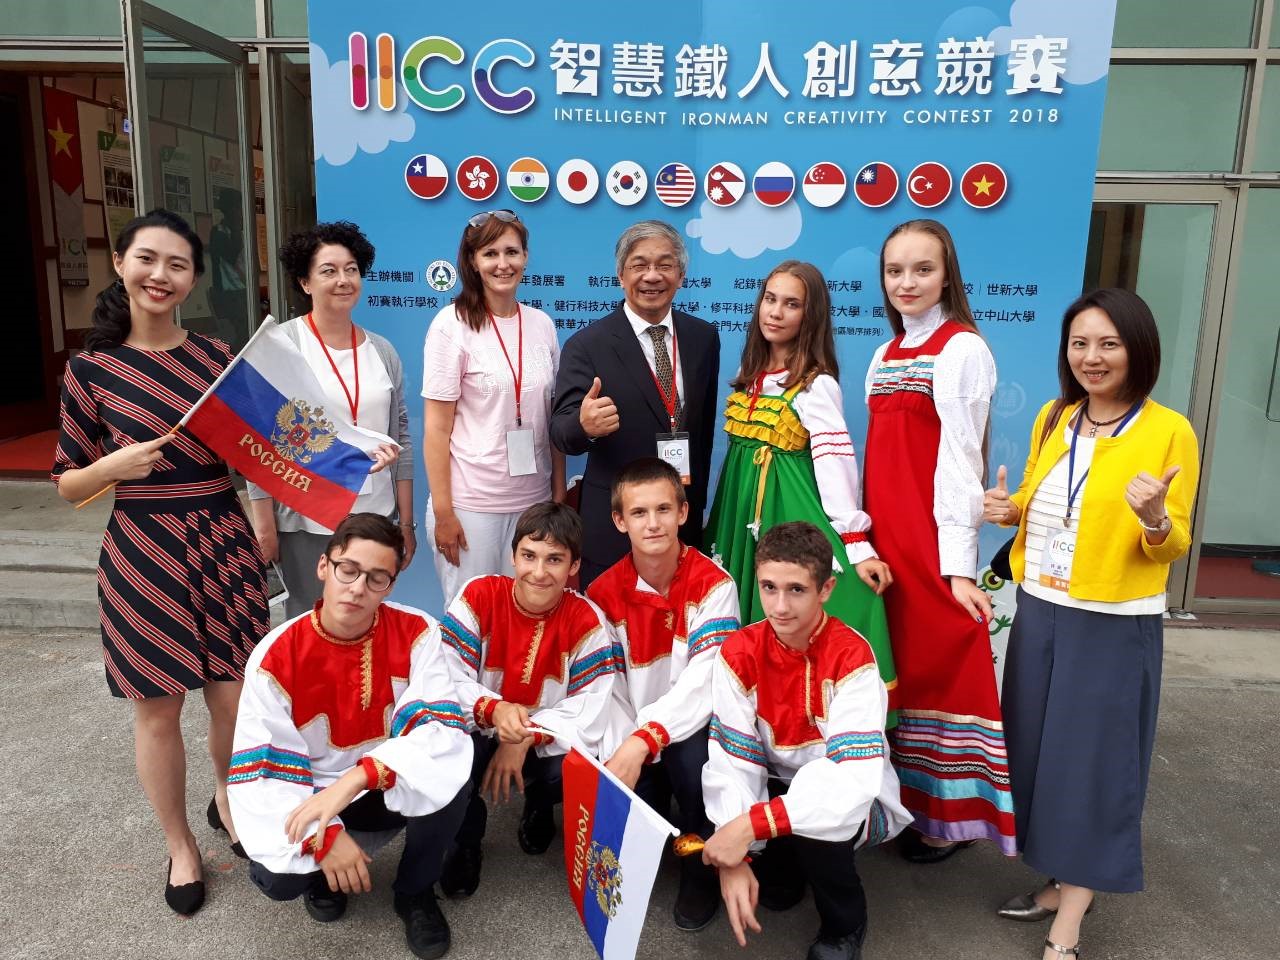 First Russian Team Competes in the  Youth Development Administration’s 2018 Intelligent Ironman Creativity Contest